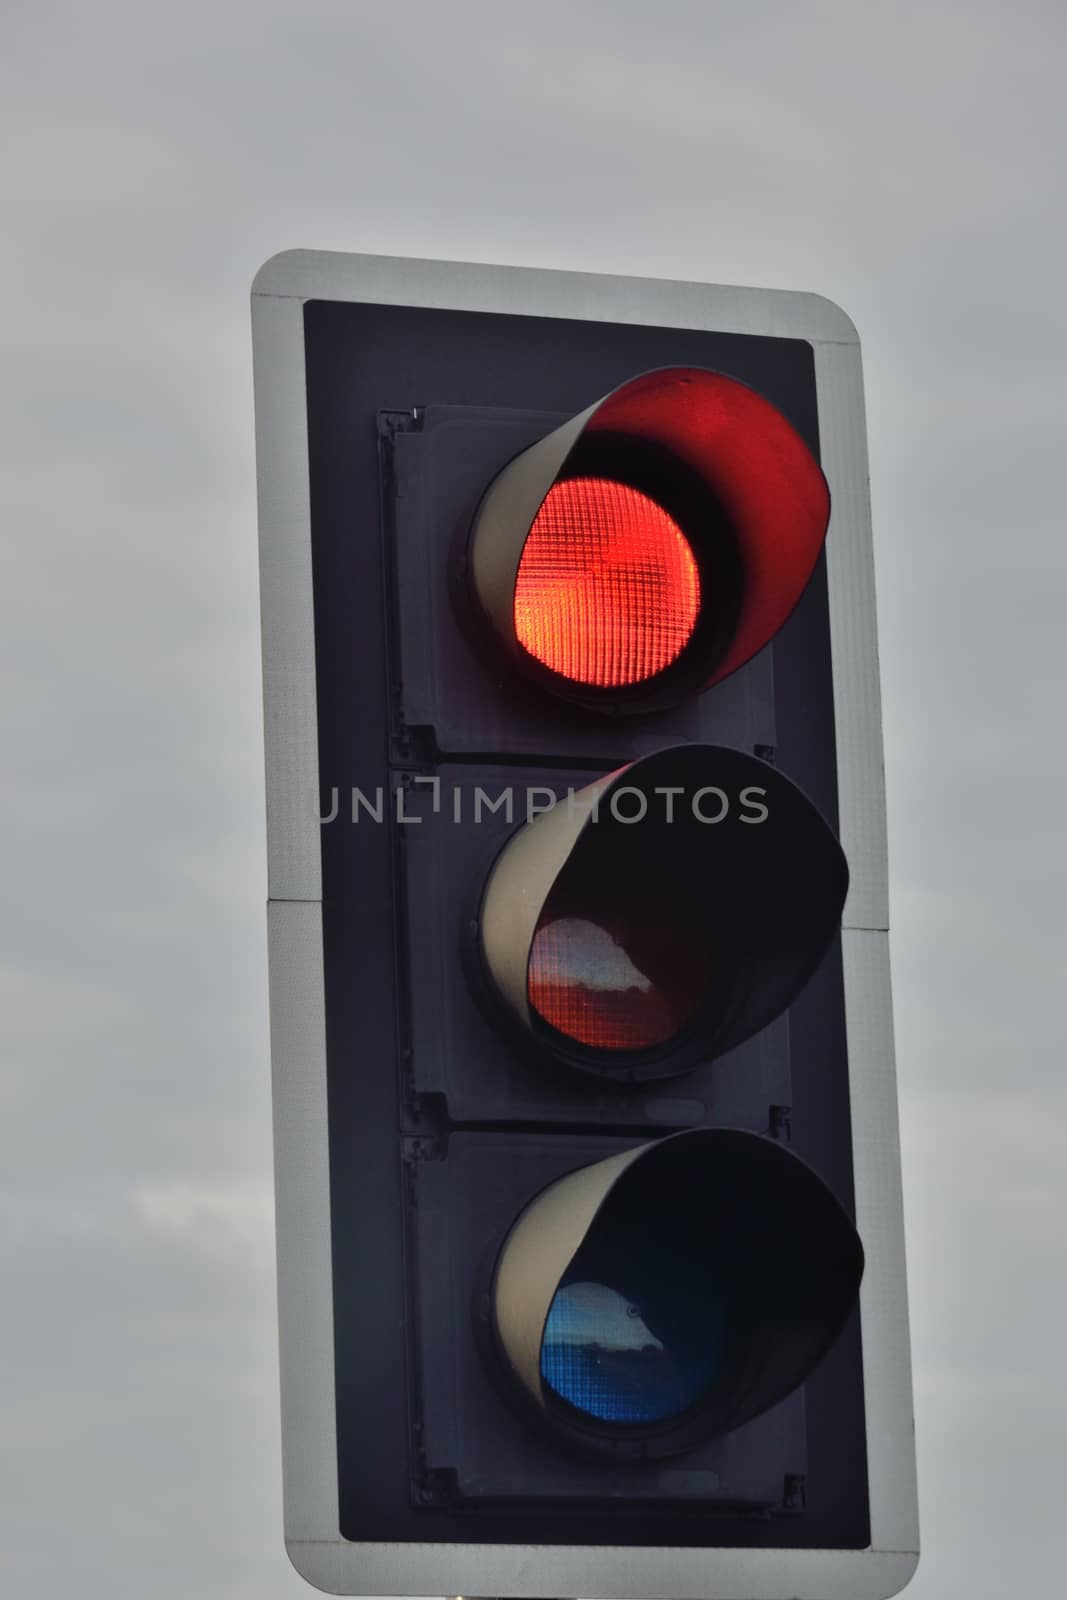 UK traffic signal at red by pauws99